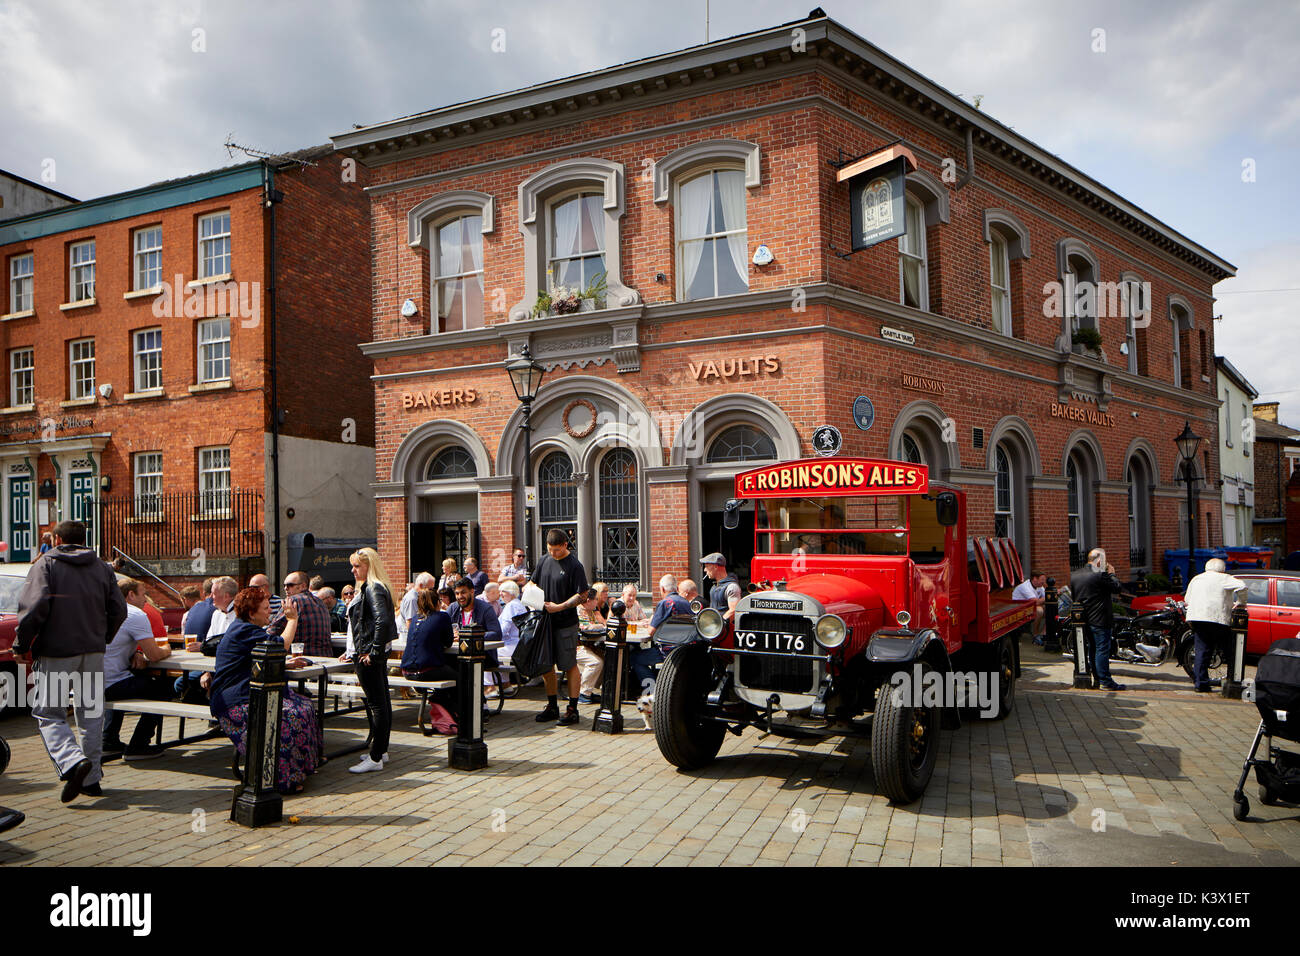 Landmark Stockport Town Centre Cheshire in gtr Manchester St Historic Robinsons Brewery Bakers Vault on the Market Brow with vintage car show Stock Photo